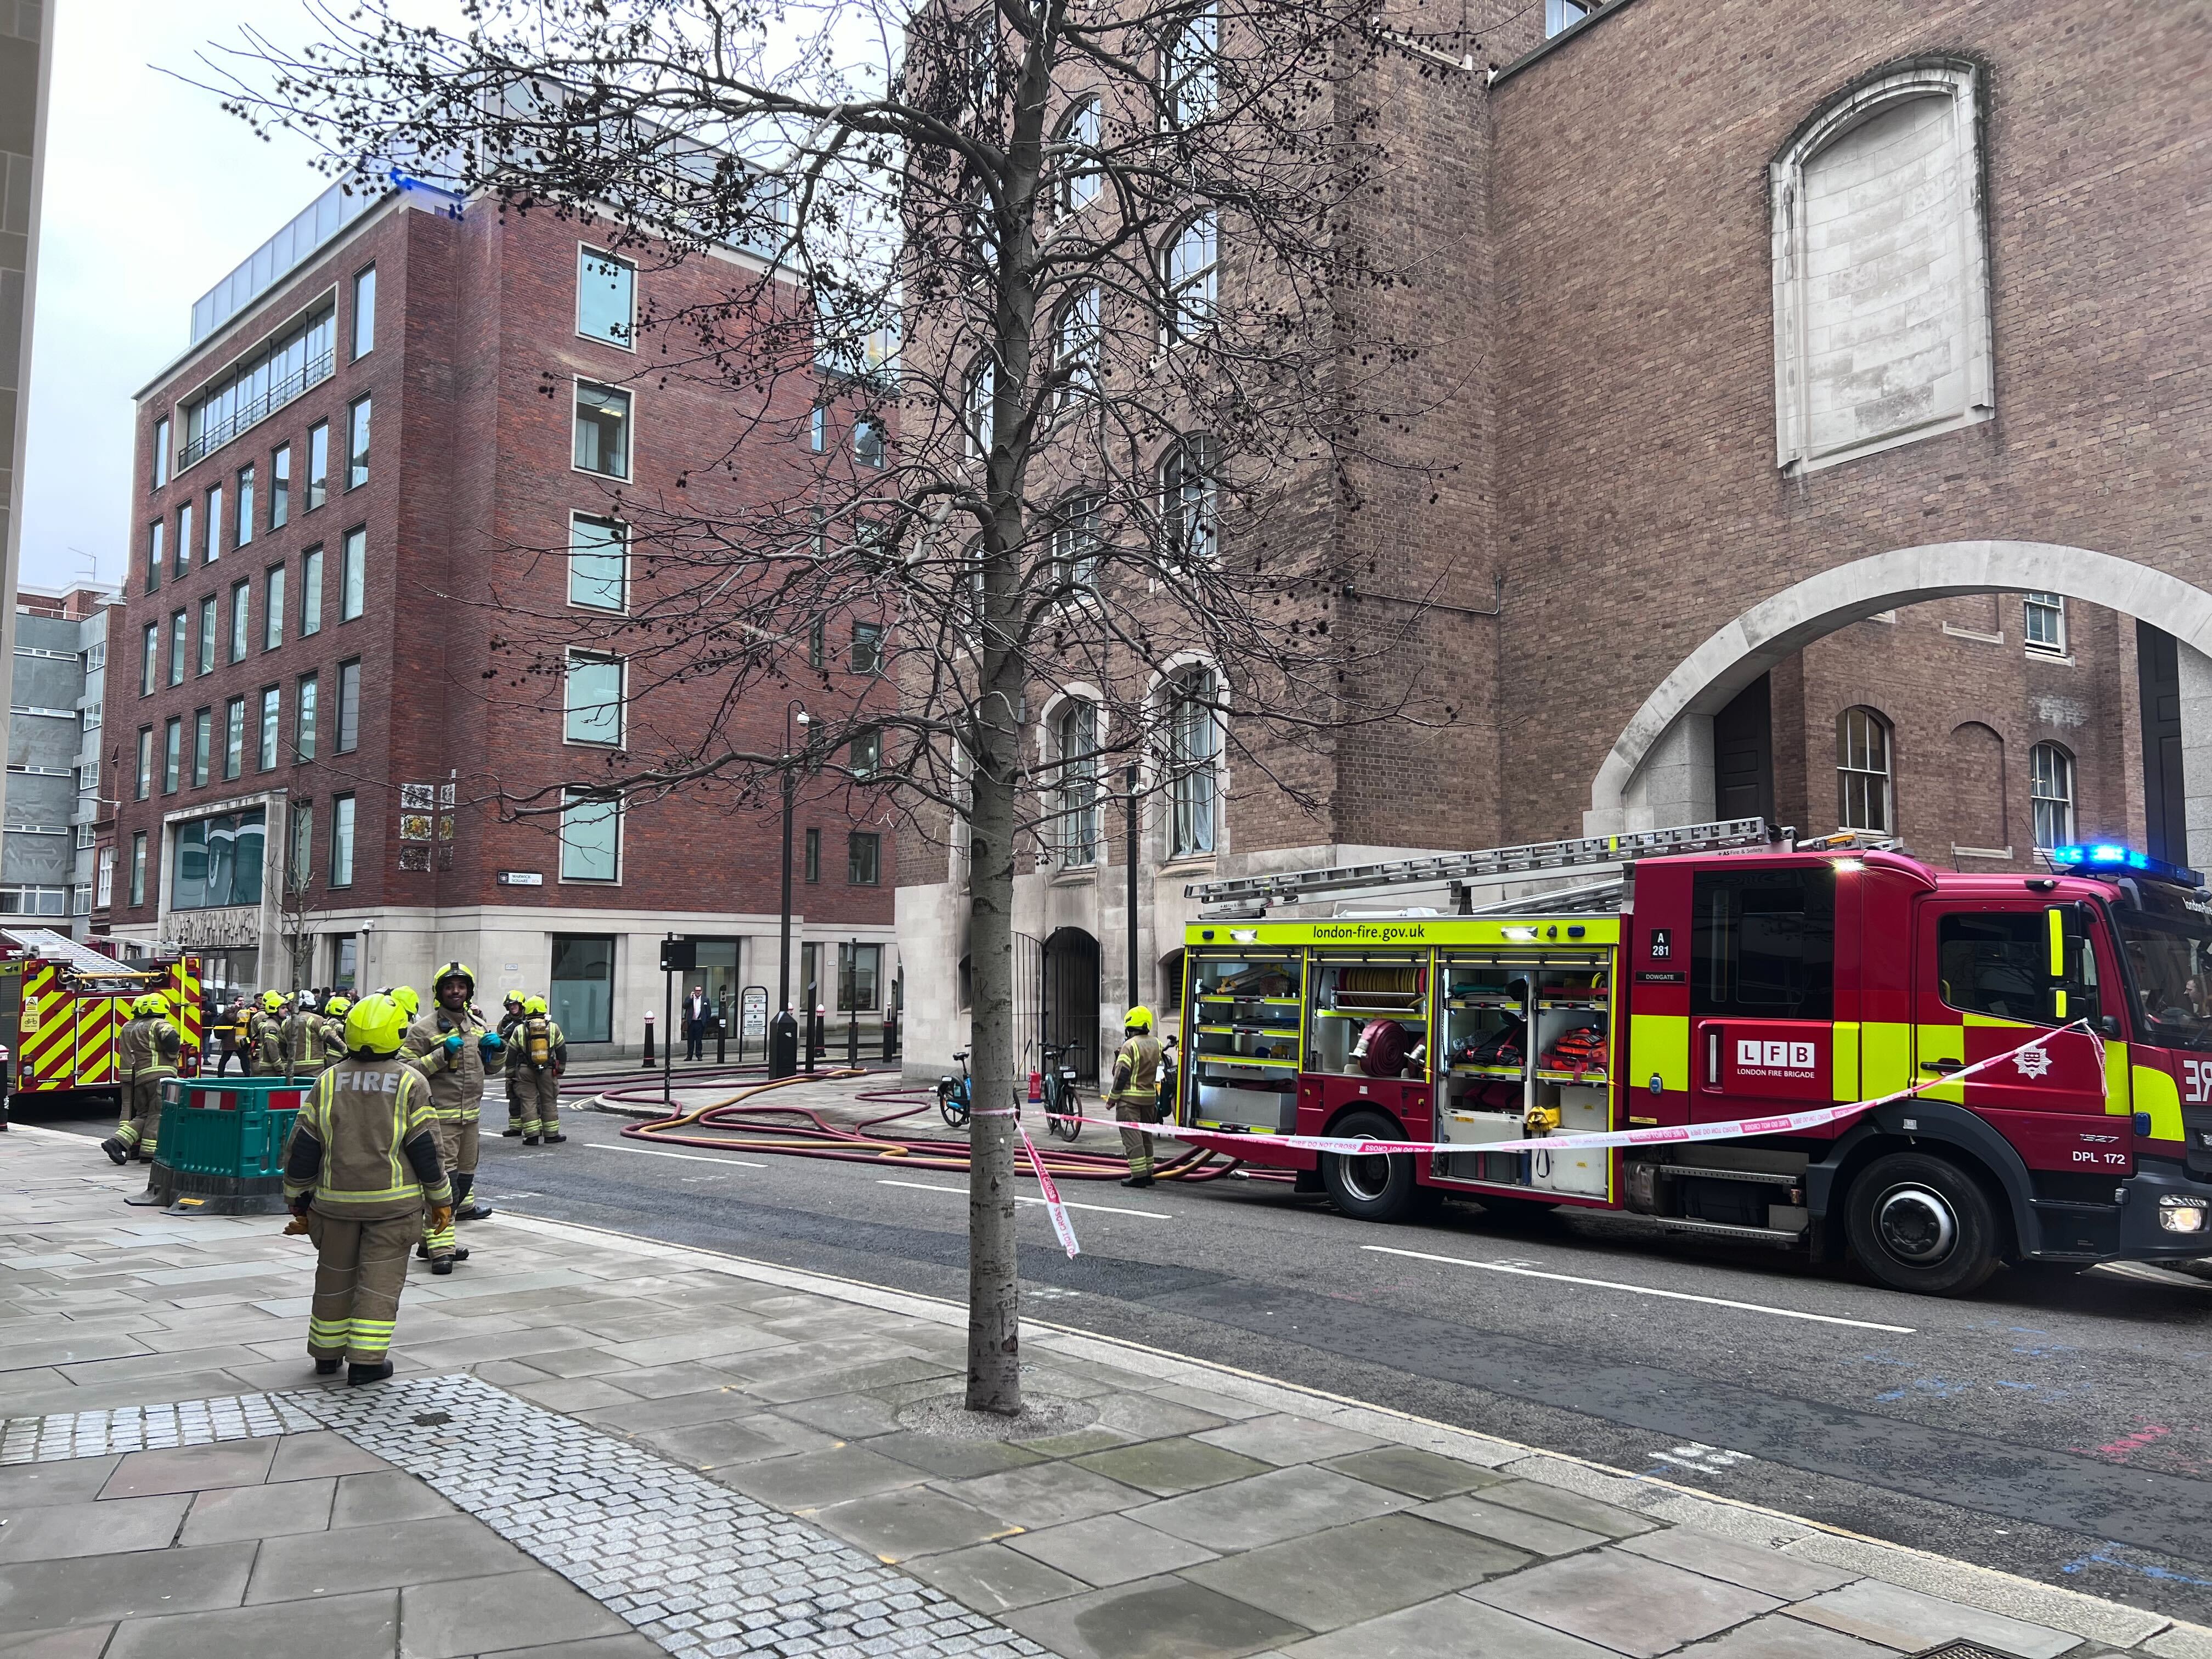 Fire fighters attending the incident in central London